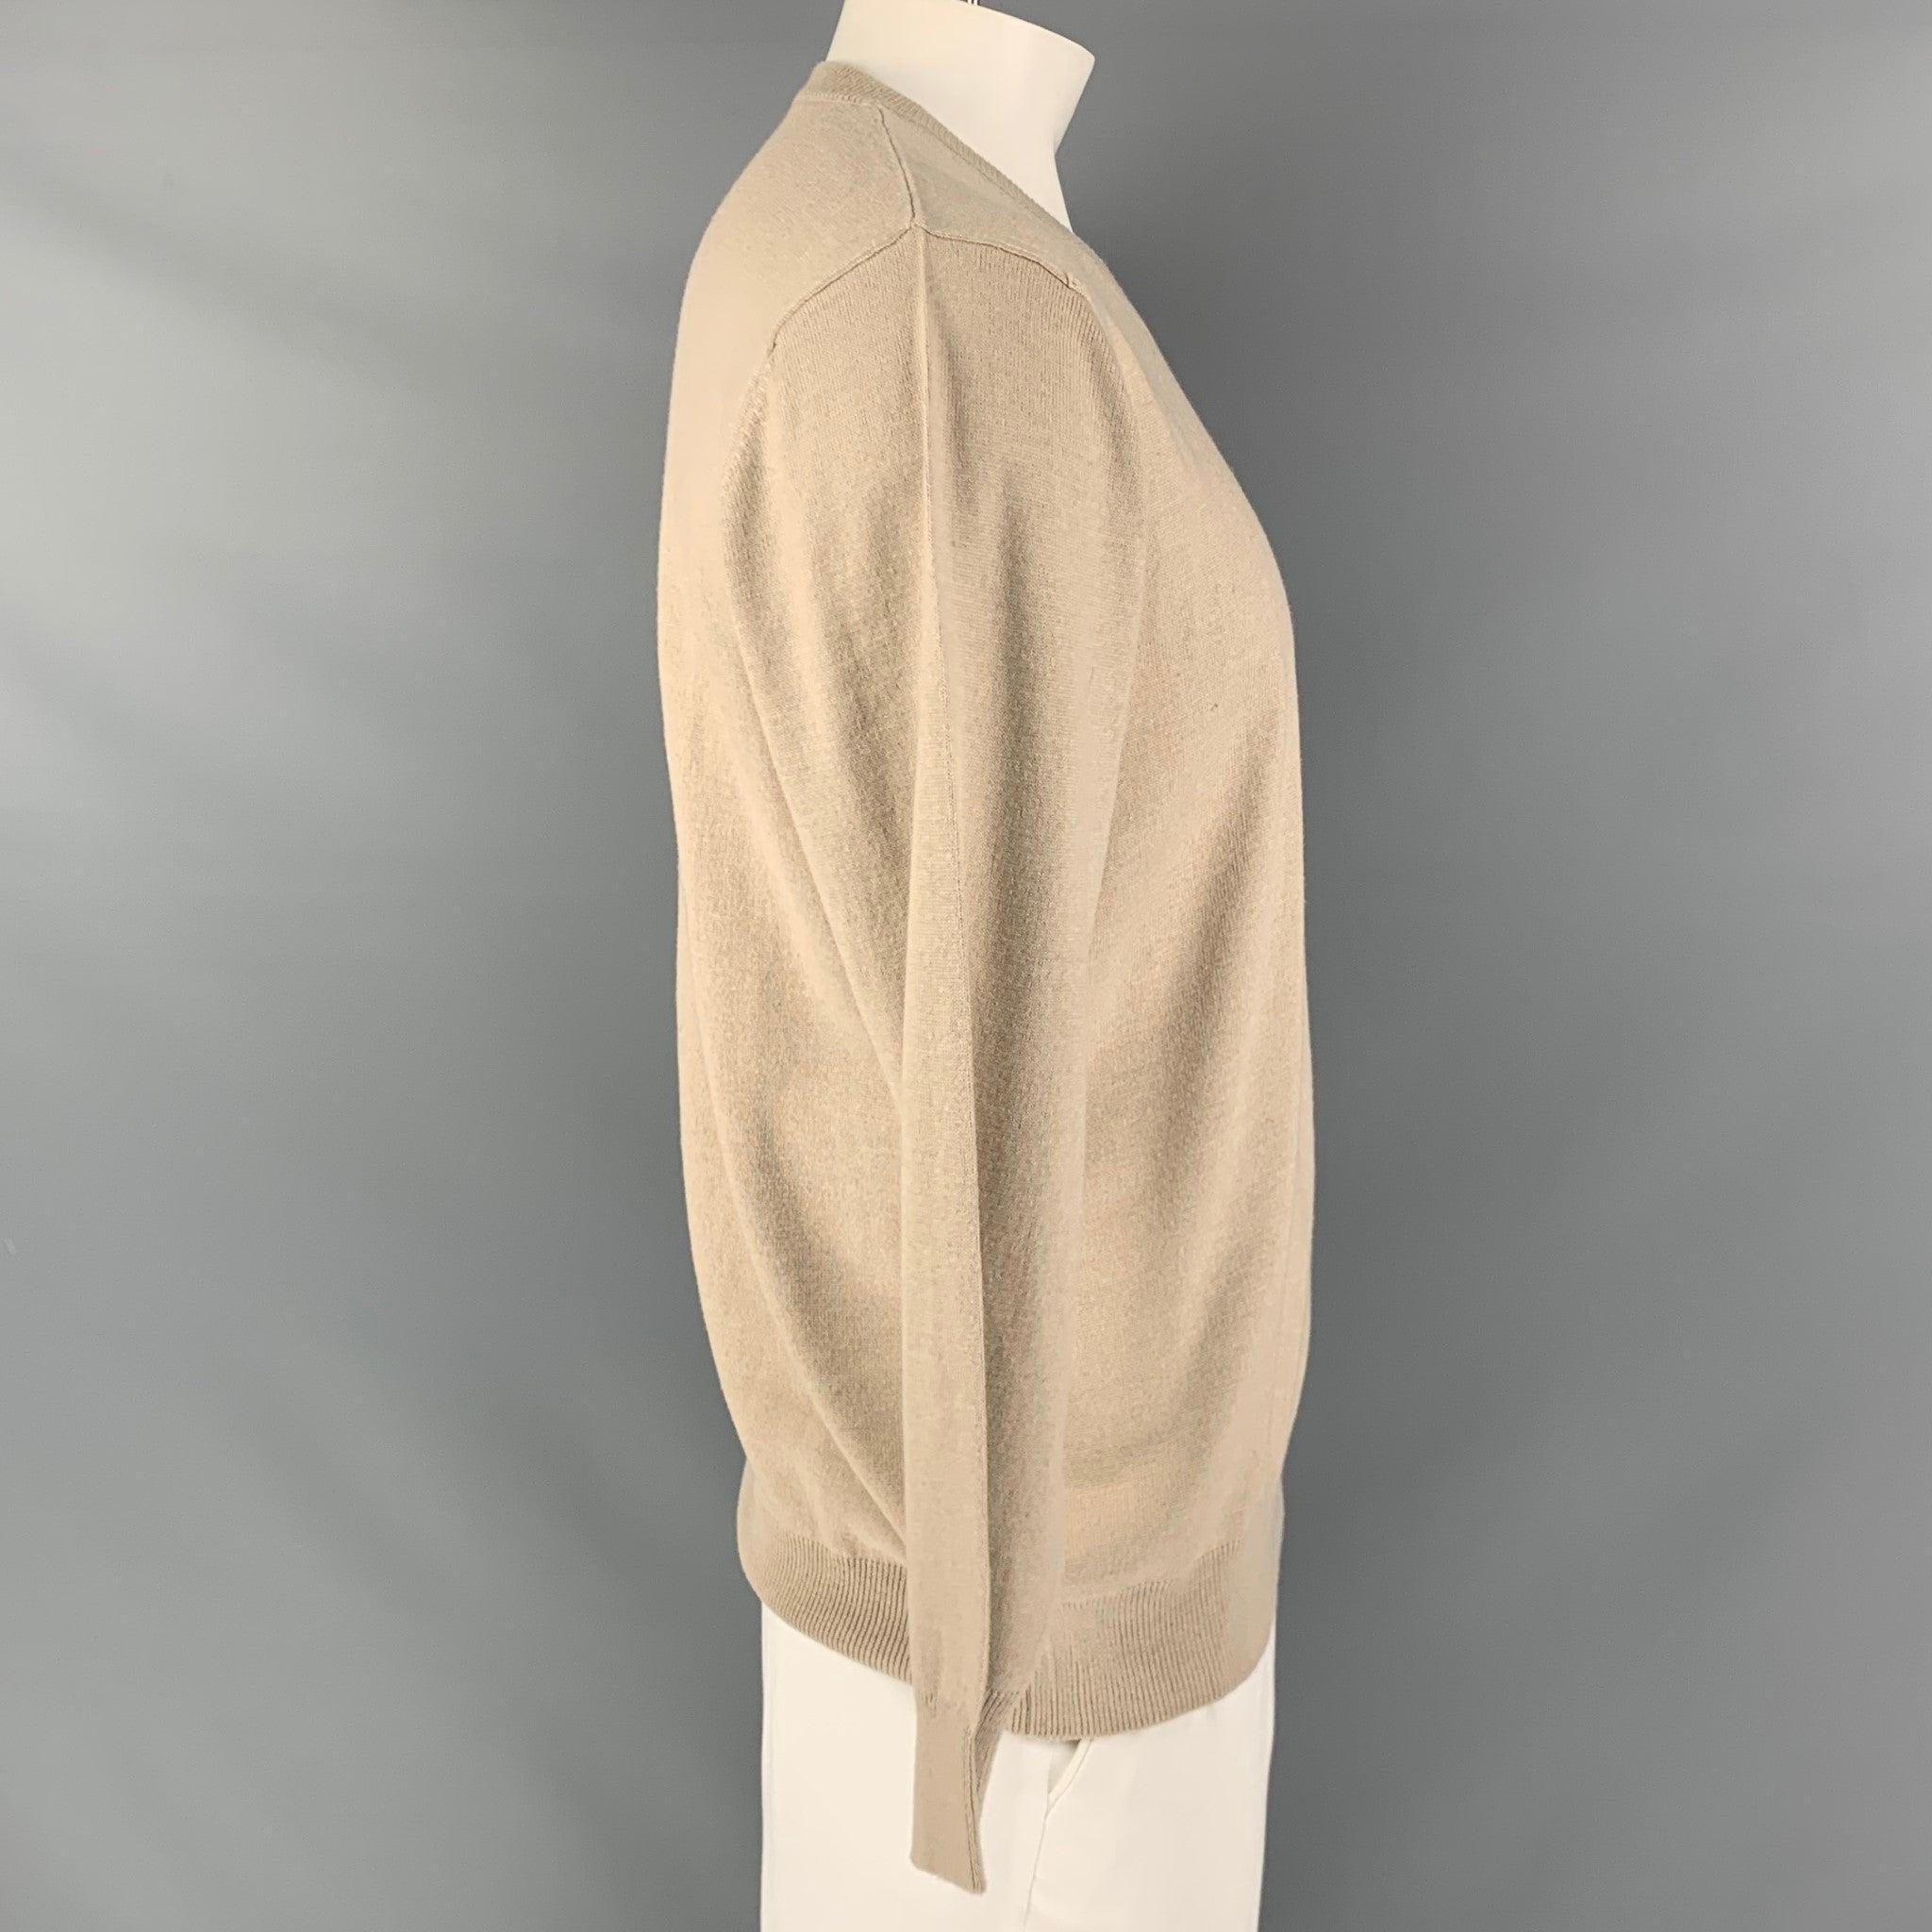 KITON pullover comes in a beige cashmere and silk knit featuring ribbed hem, and a V-neck. Made in Italy.Excellent Pre-Owned Condition. 

Marked:   L/ 52 

Measurements: 
 
Shoulder: 19 inches Chest: 48 inches Sleeve: 26 inches Length: 28.5 inches